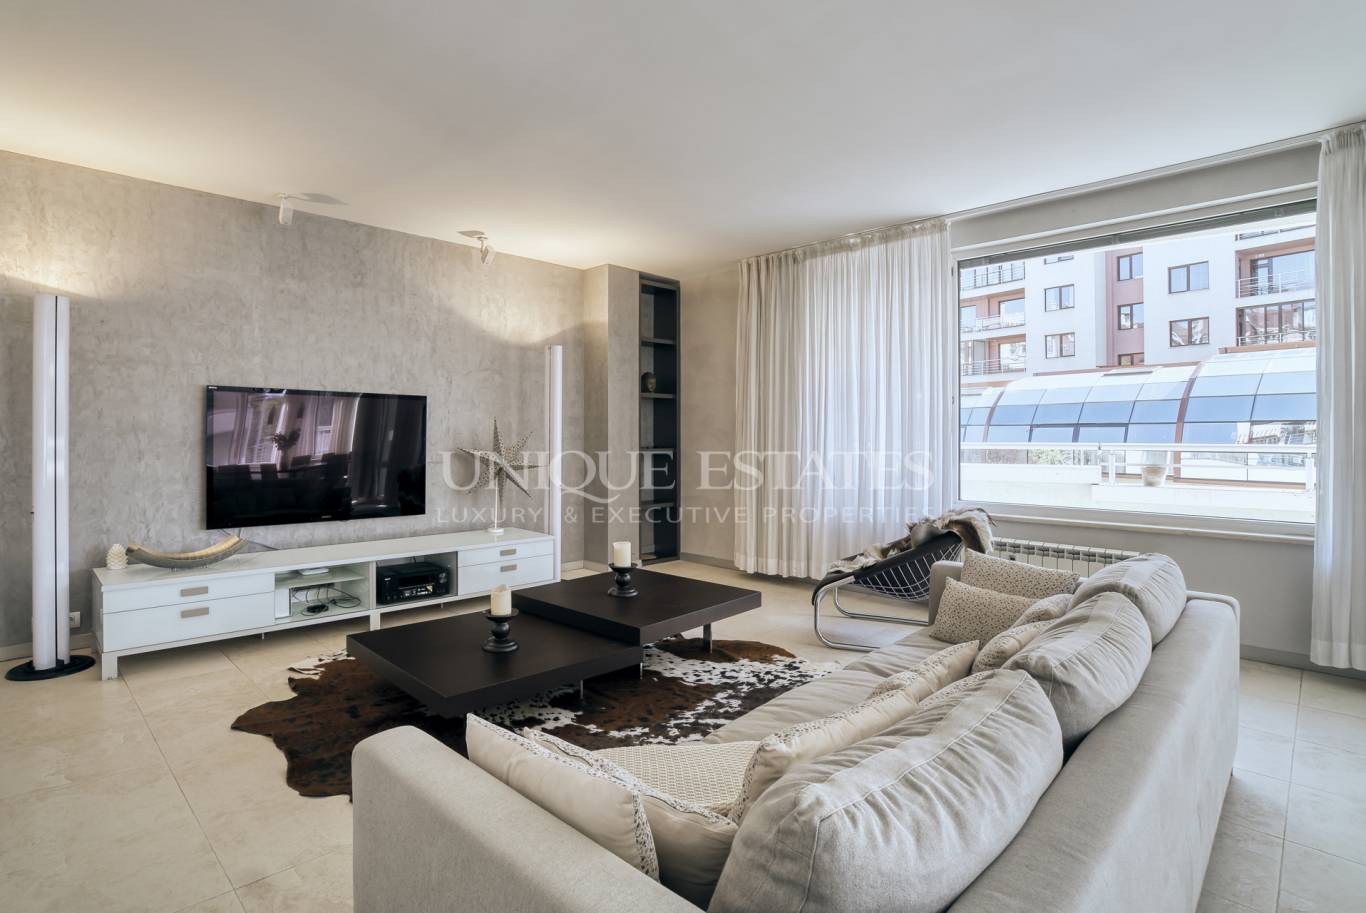 Apartment for sale in Sofia, Lozenets with listing ID: K13111 - image 2